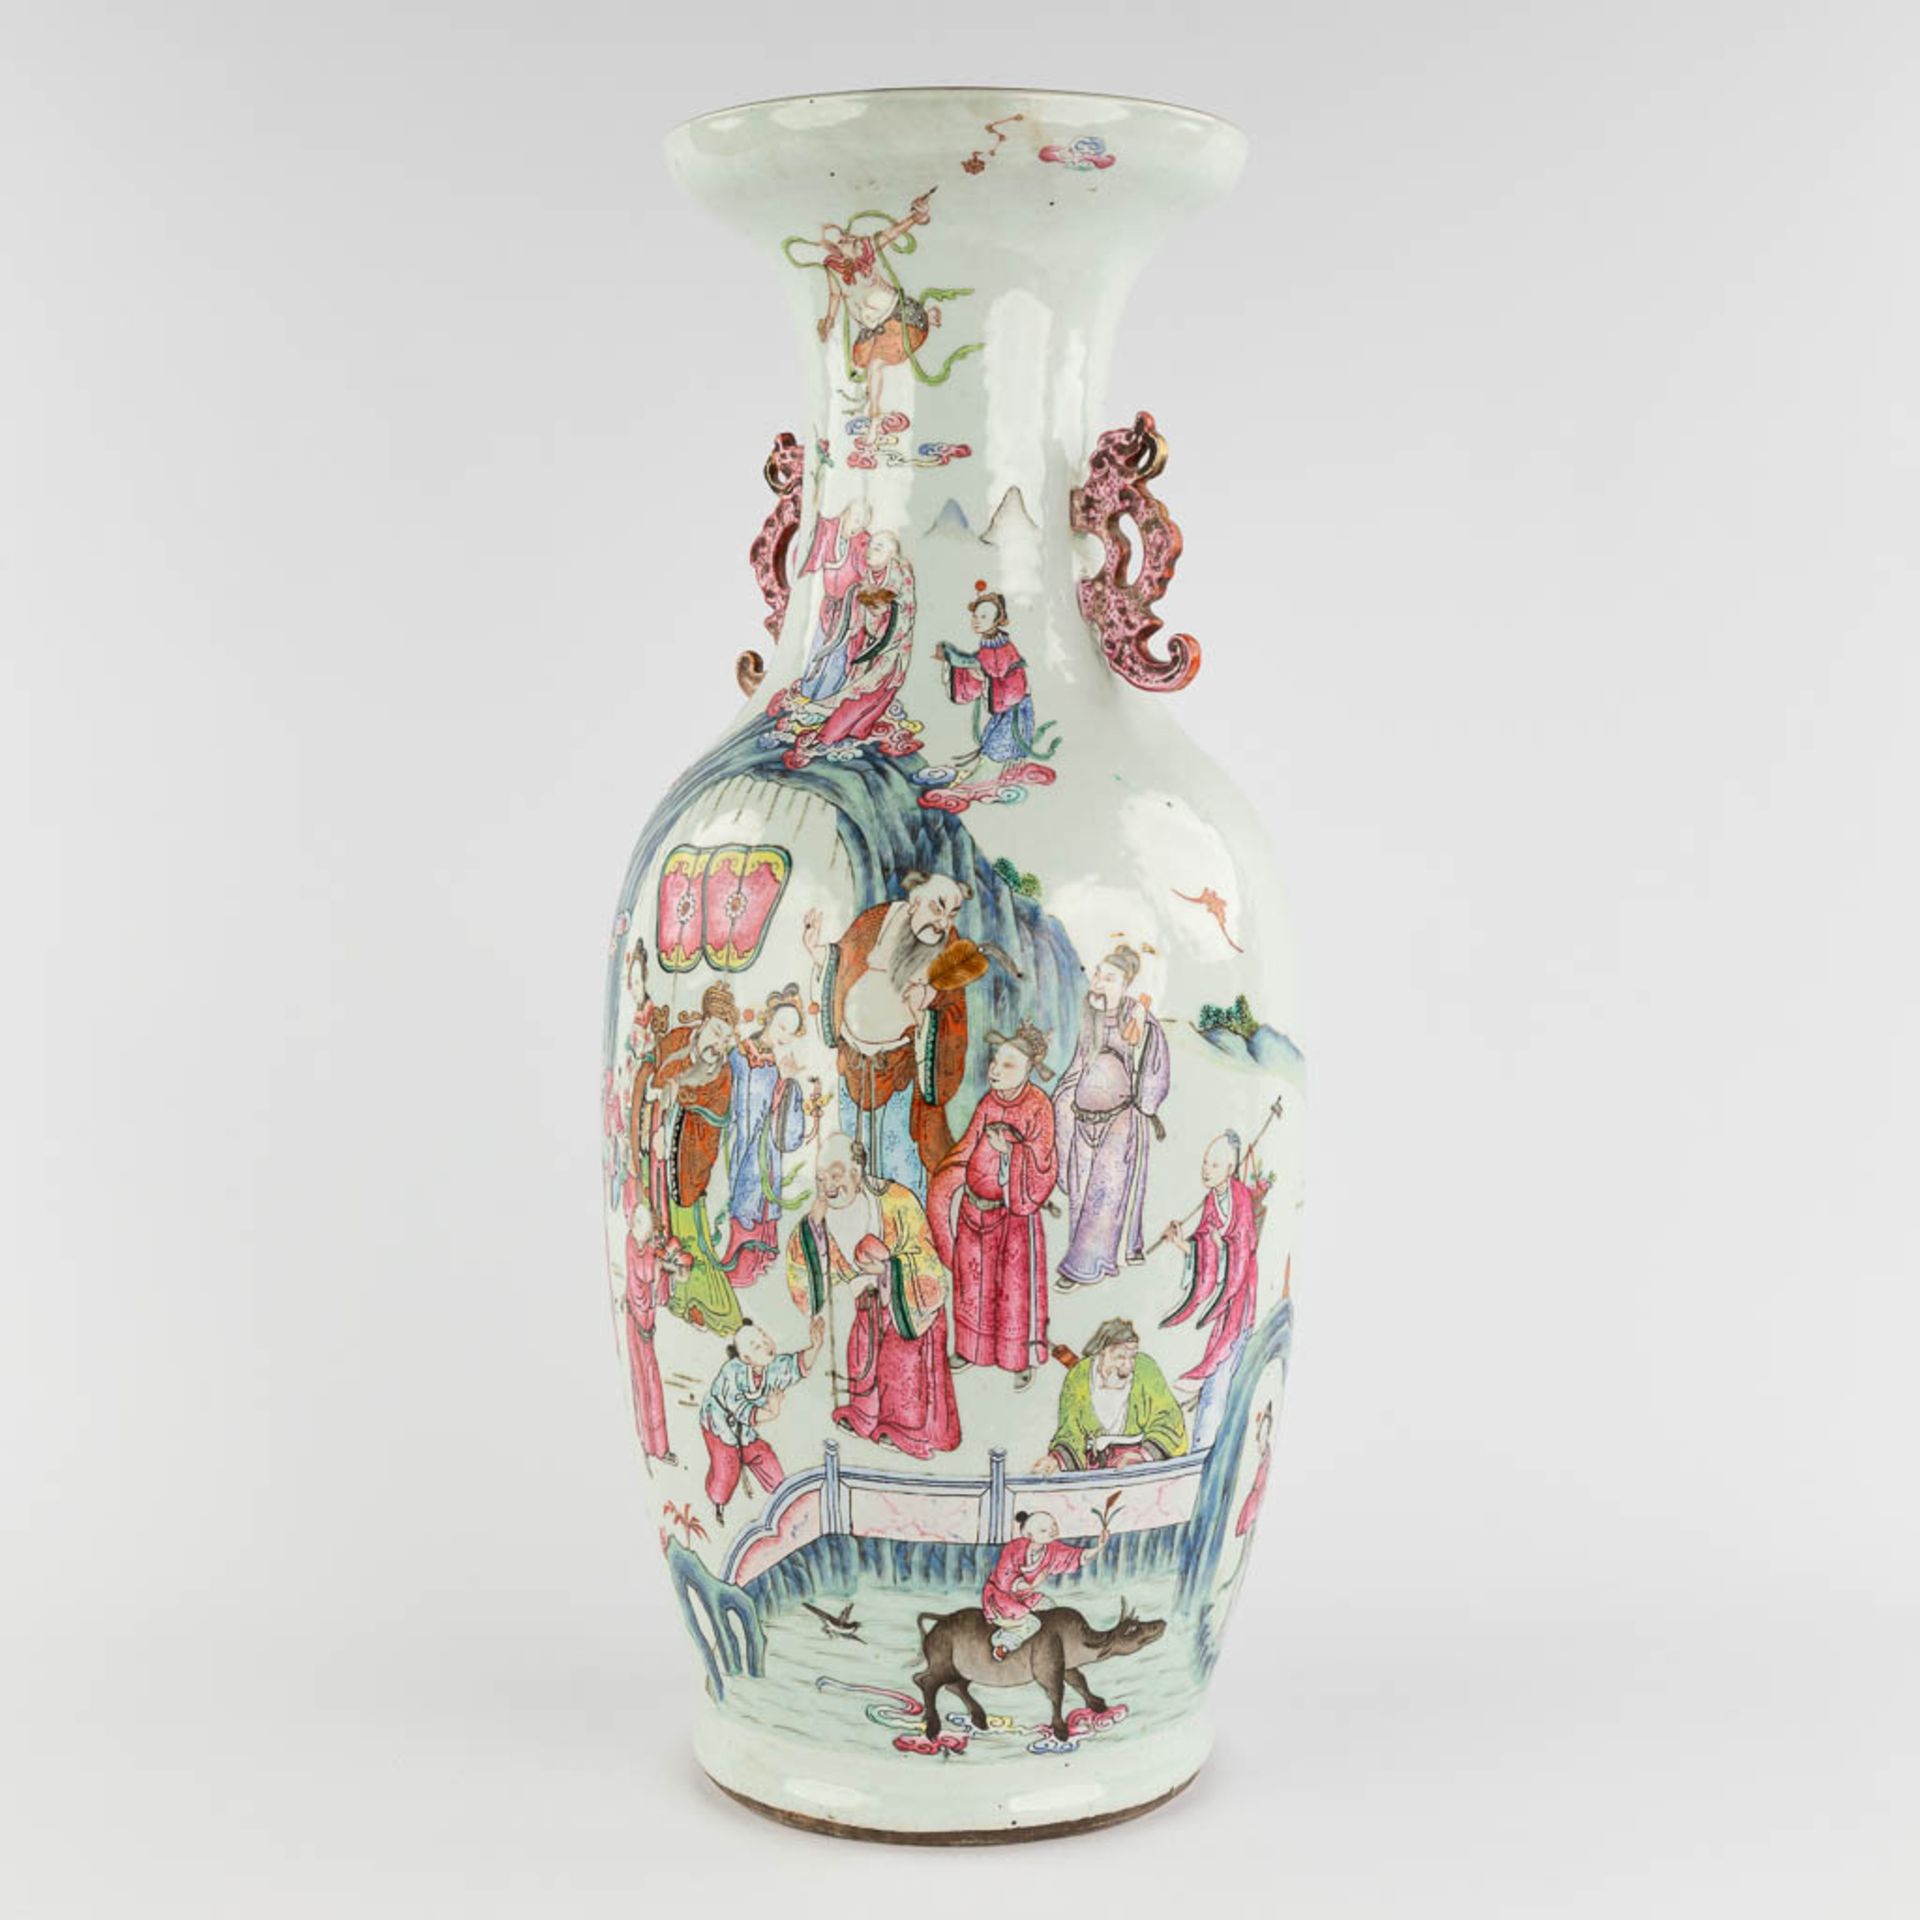 A Chinese Famille Rose vase, decorated with Wise men and items of good fortune. 19th C. (H:60 x D:25 - Image 7 of 18